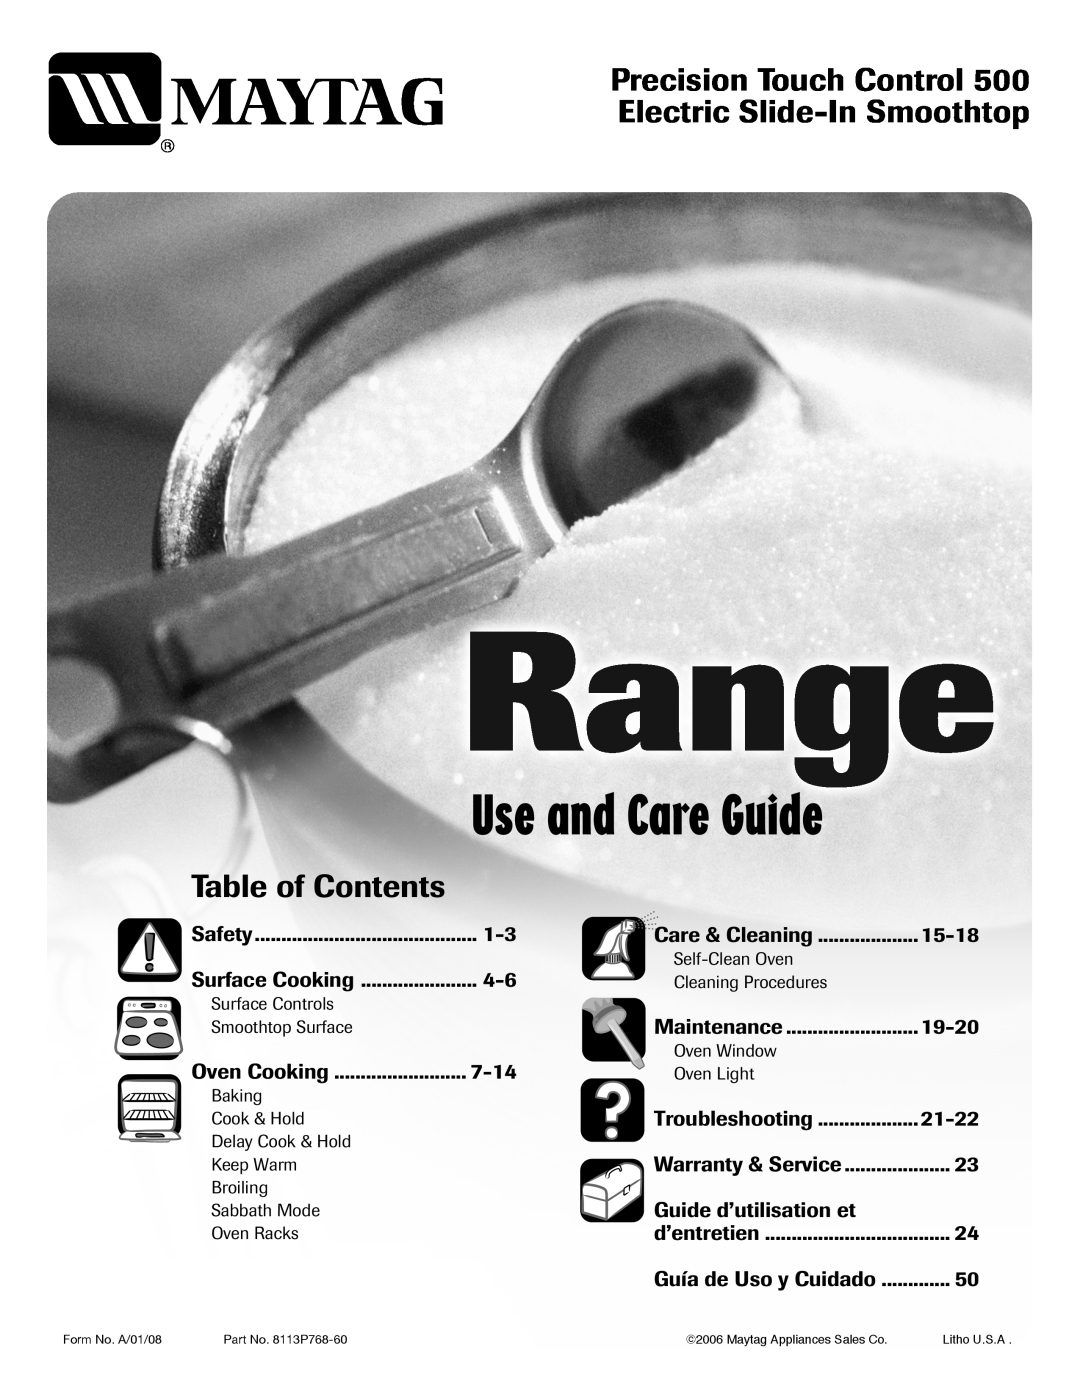 Maytag 8113P768-60 manual Use and Care Guide, Precision Touch Control Electric Slide-In Smoothtop, Table of Contents 